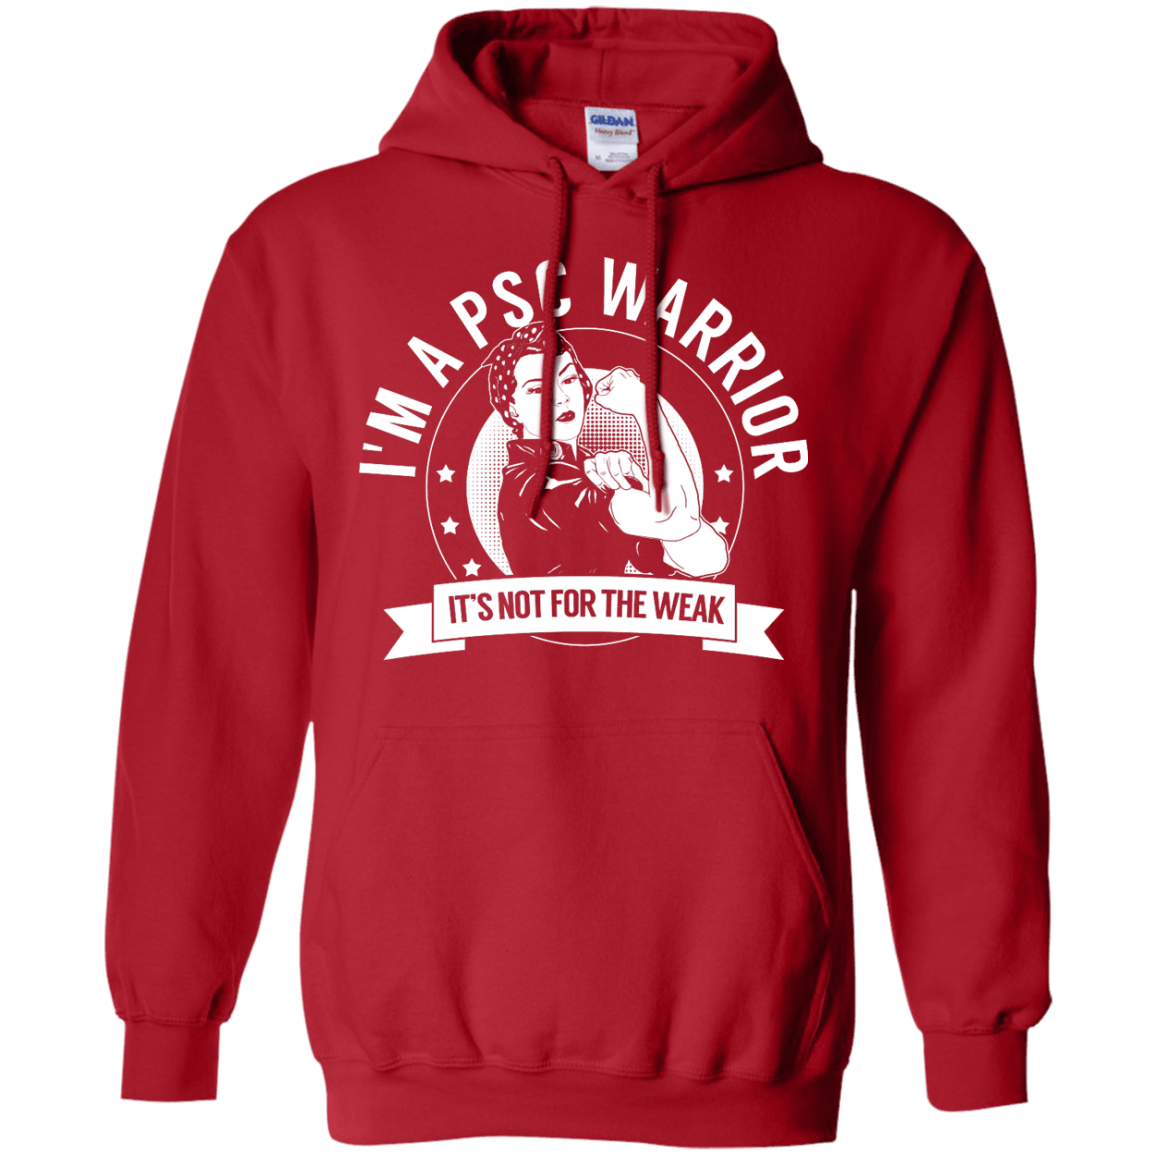 Primary Sclerosing Cholangitis - PSC Warrior Not For The Weak Pullover Hoodie 8 oz - The Unchargeables